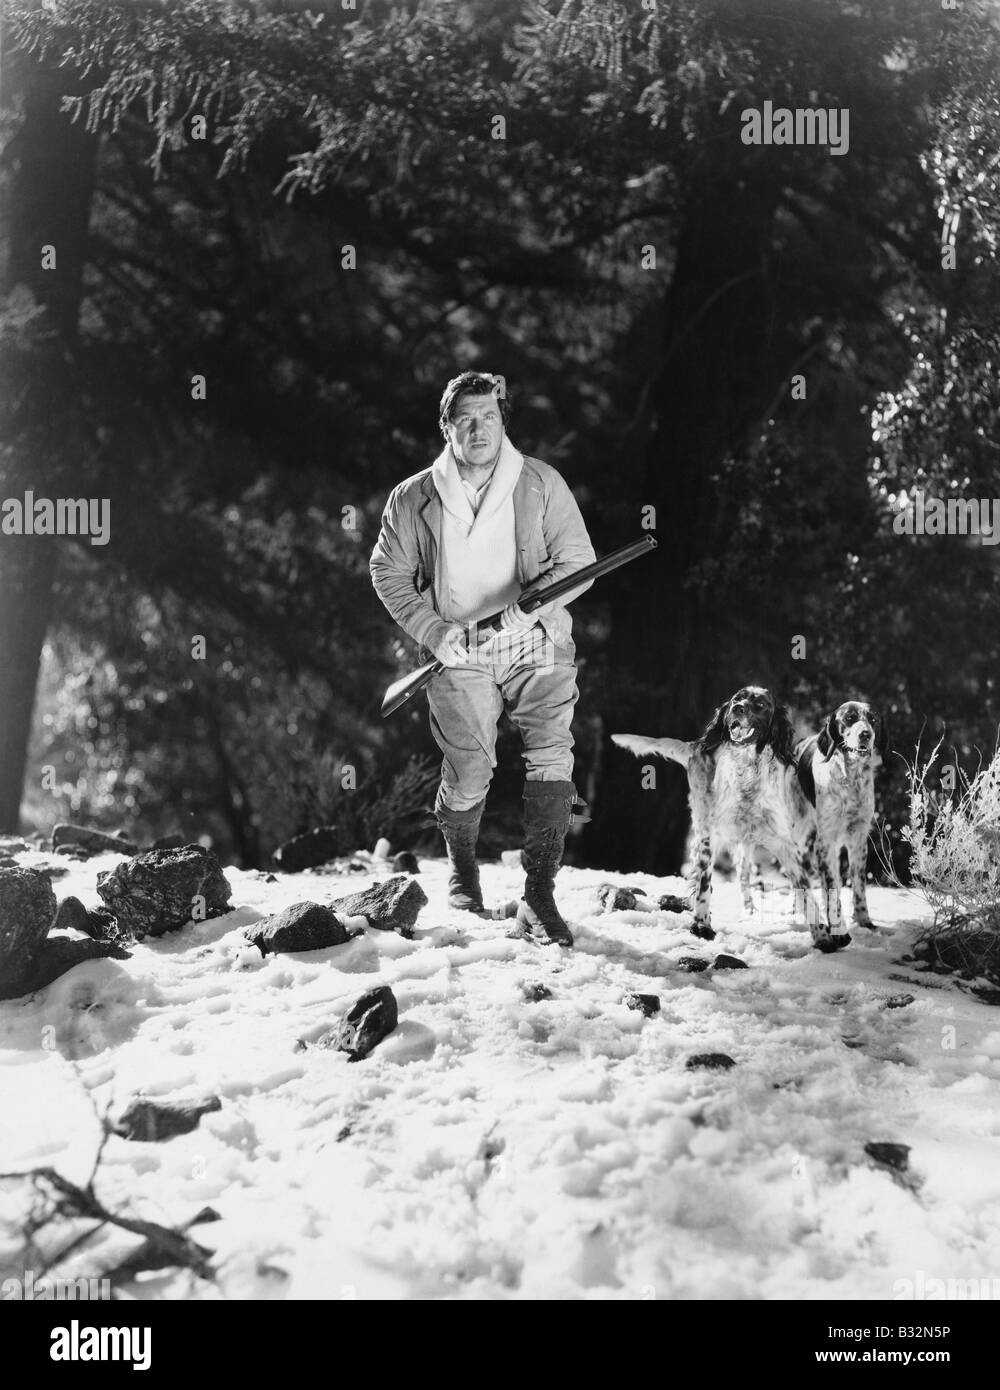 Man hunting in snowy woods with dogs Stock Photo